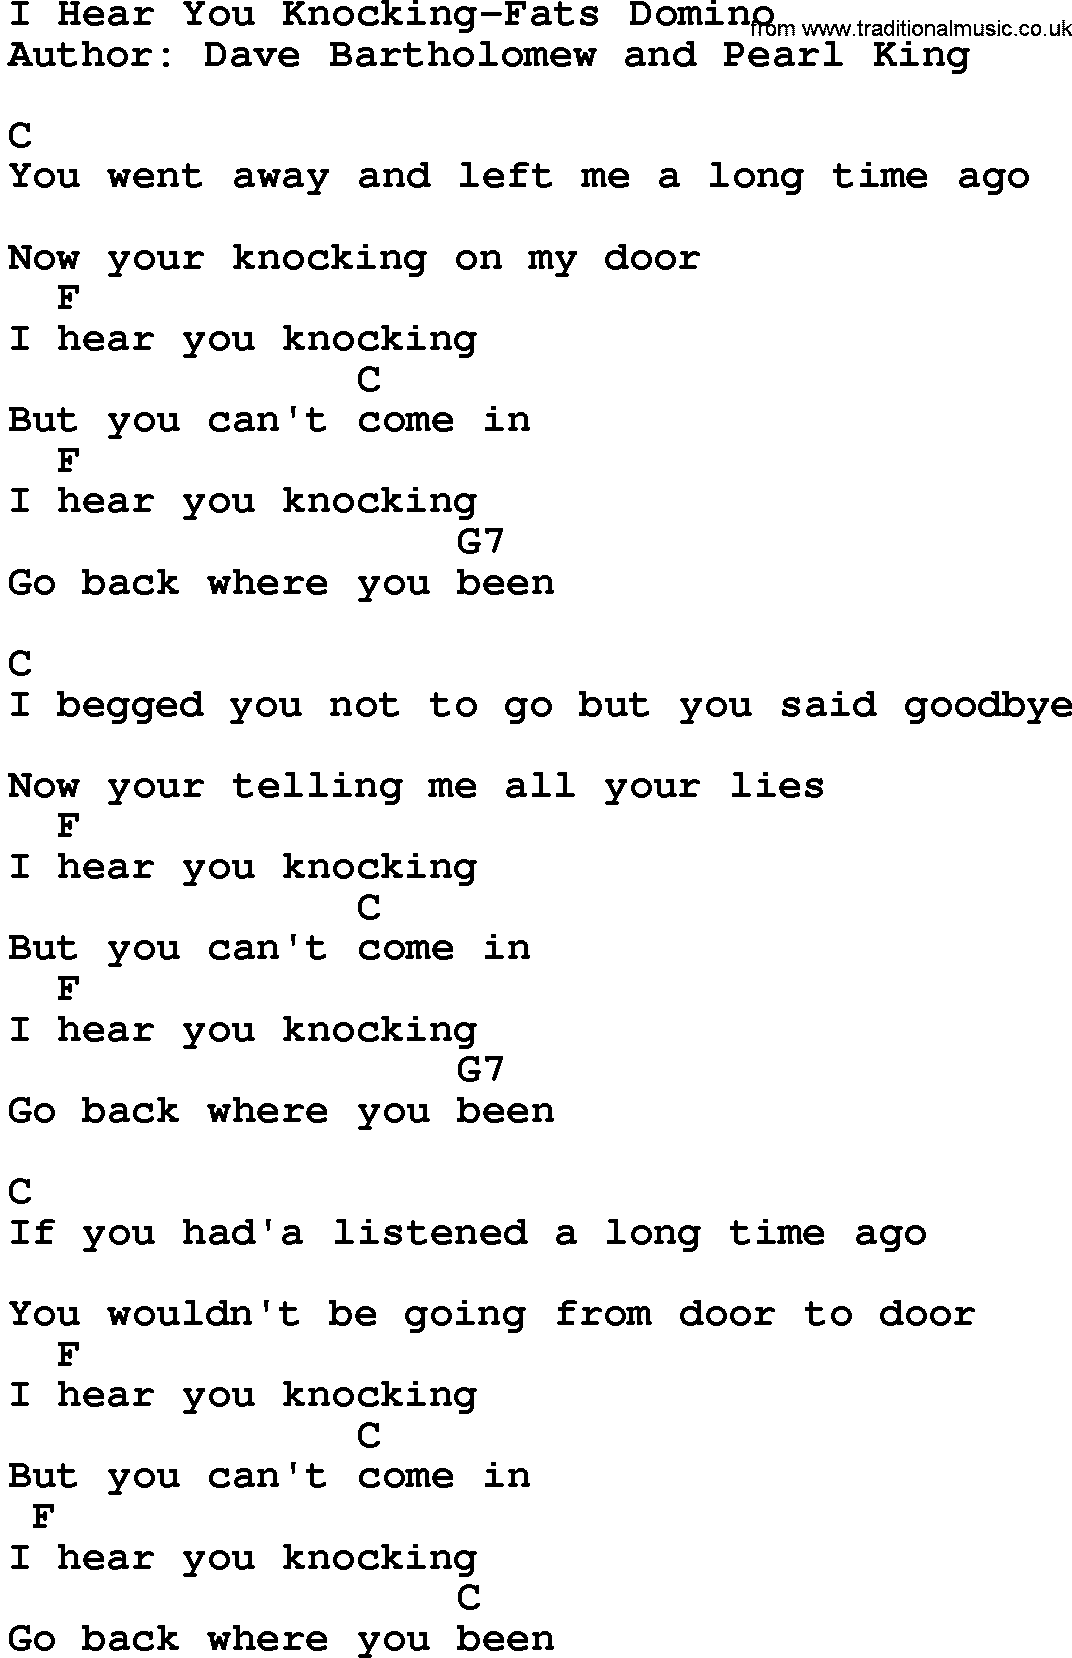 Country music song: I Hear You Knocking-Fats Domino lyrics and chords